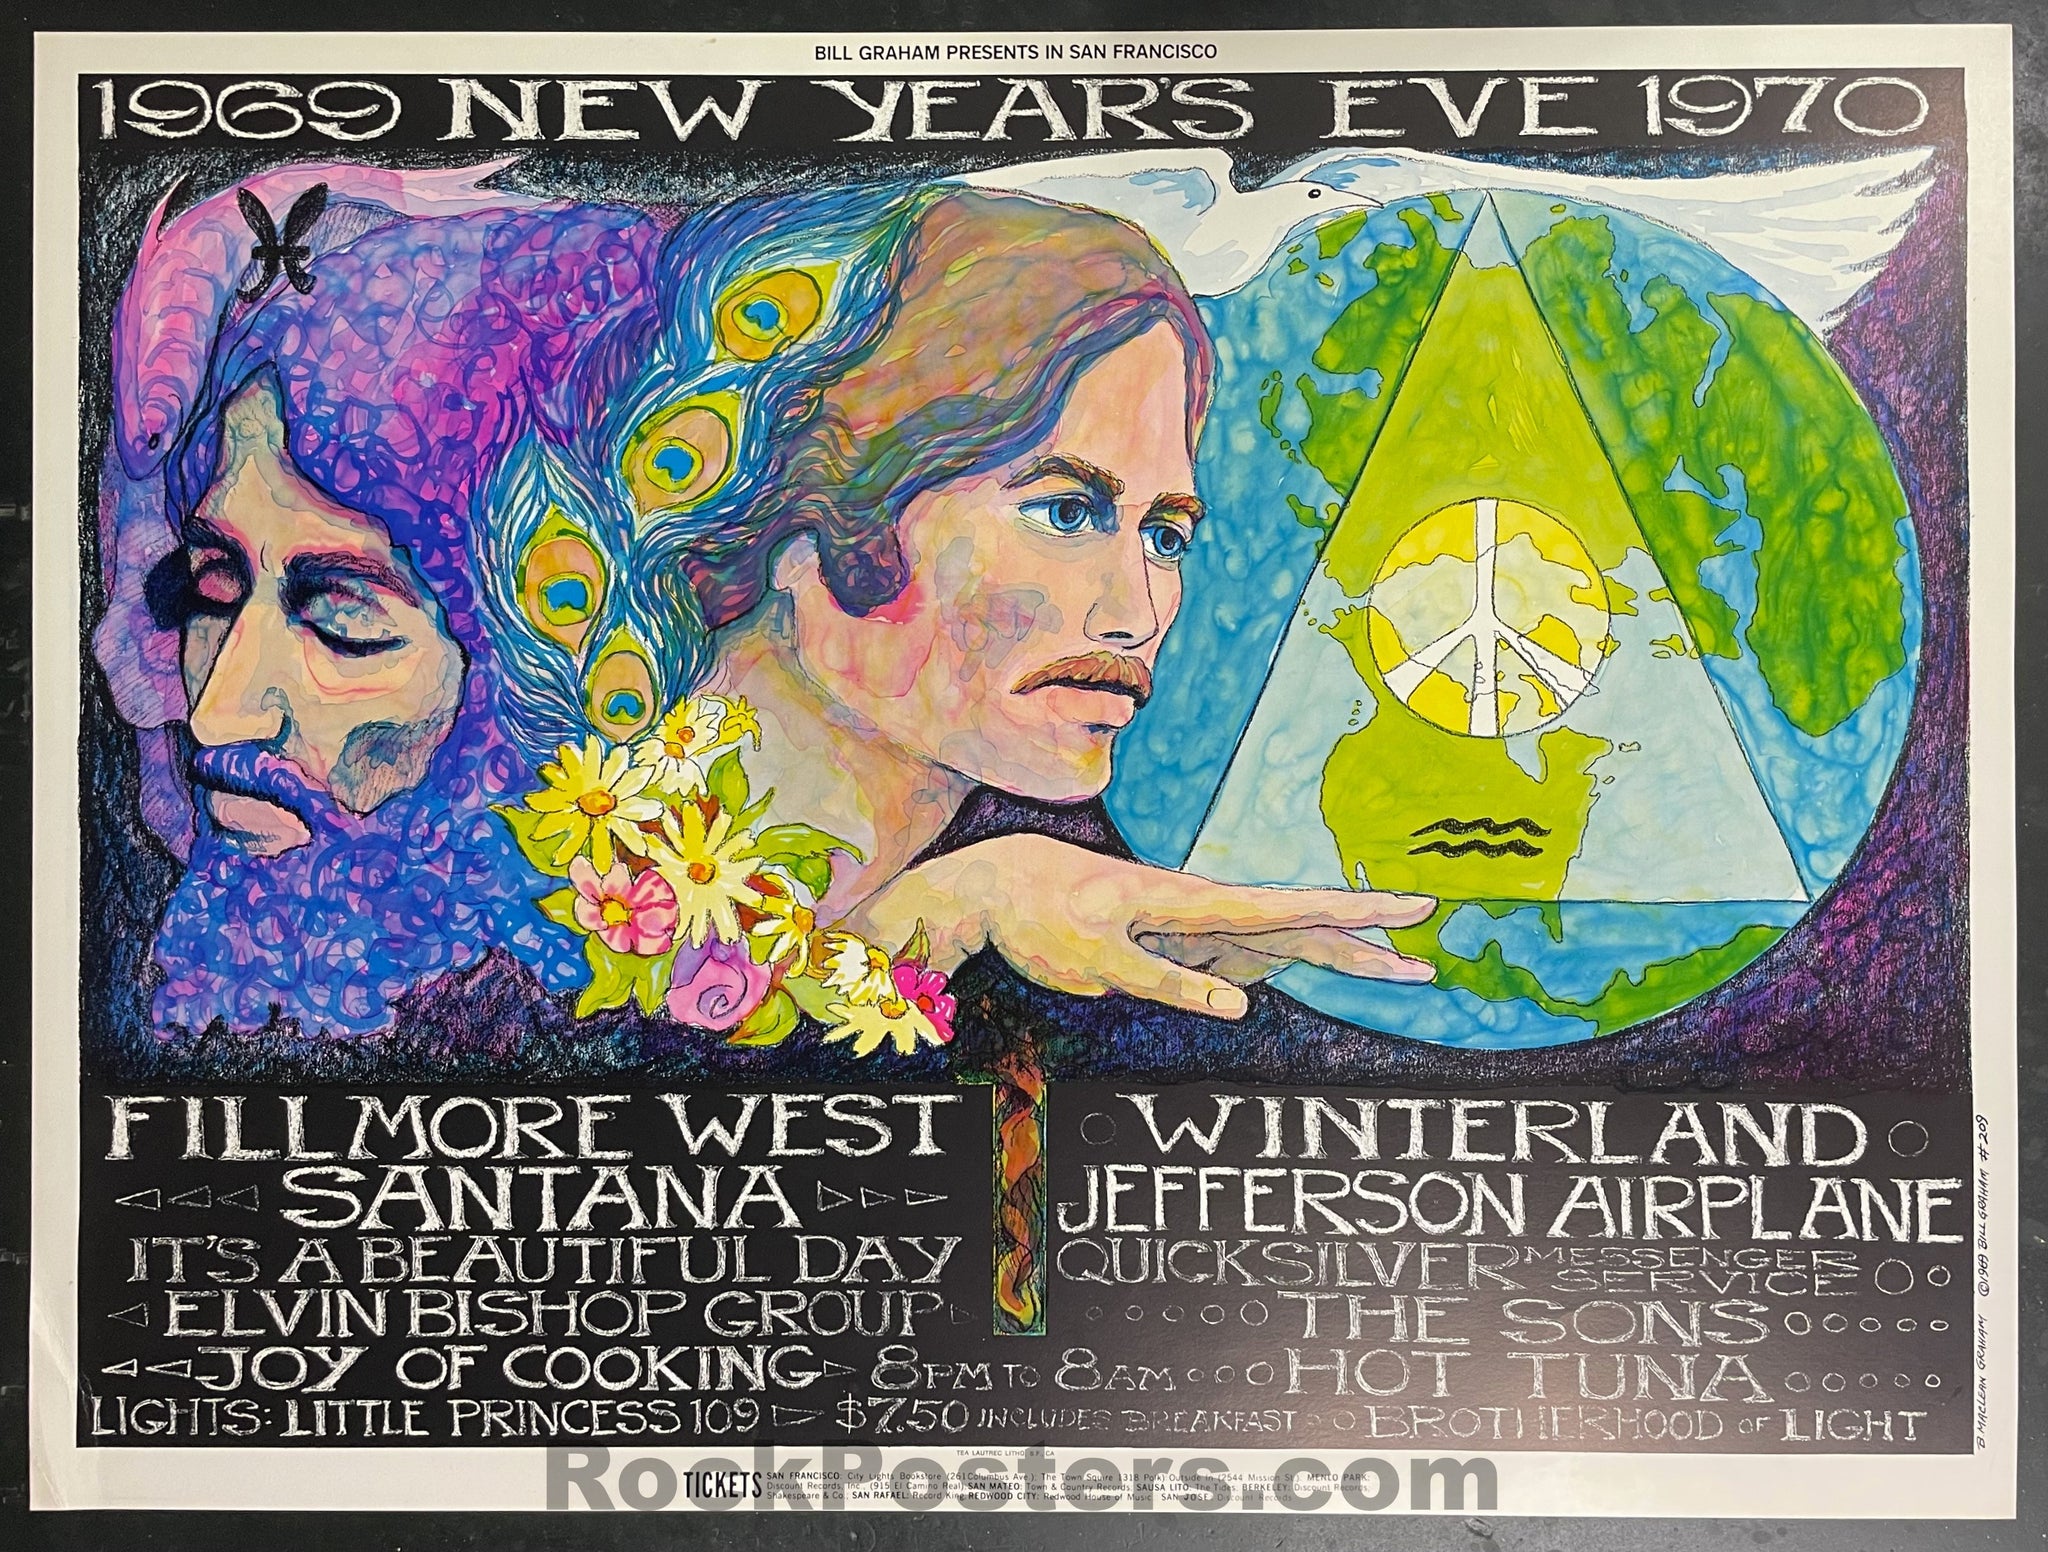 AUCTION - BG-209 - Santana Jefferson Airplane - New Years 1969 - Bonnie MacLean Poster - Fillmore West - Excellent